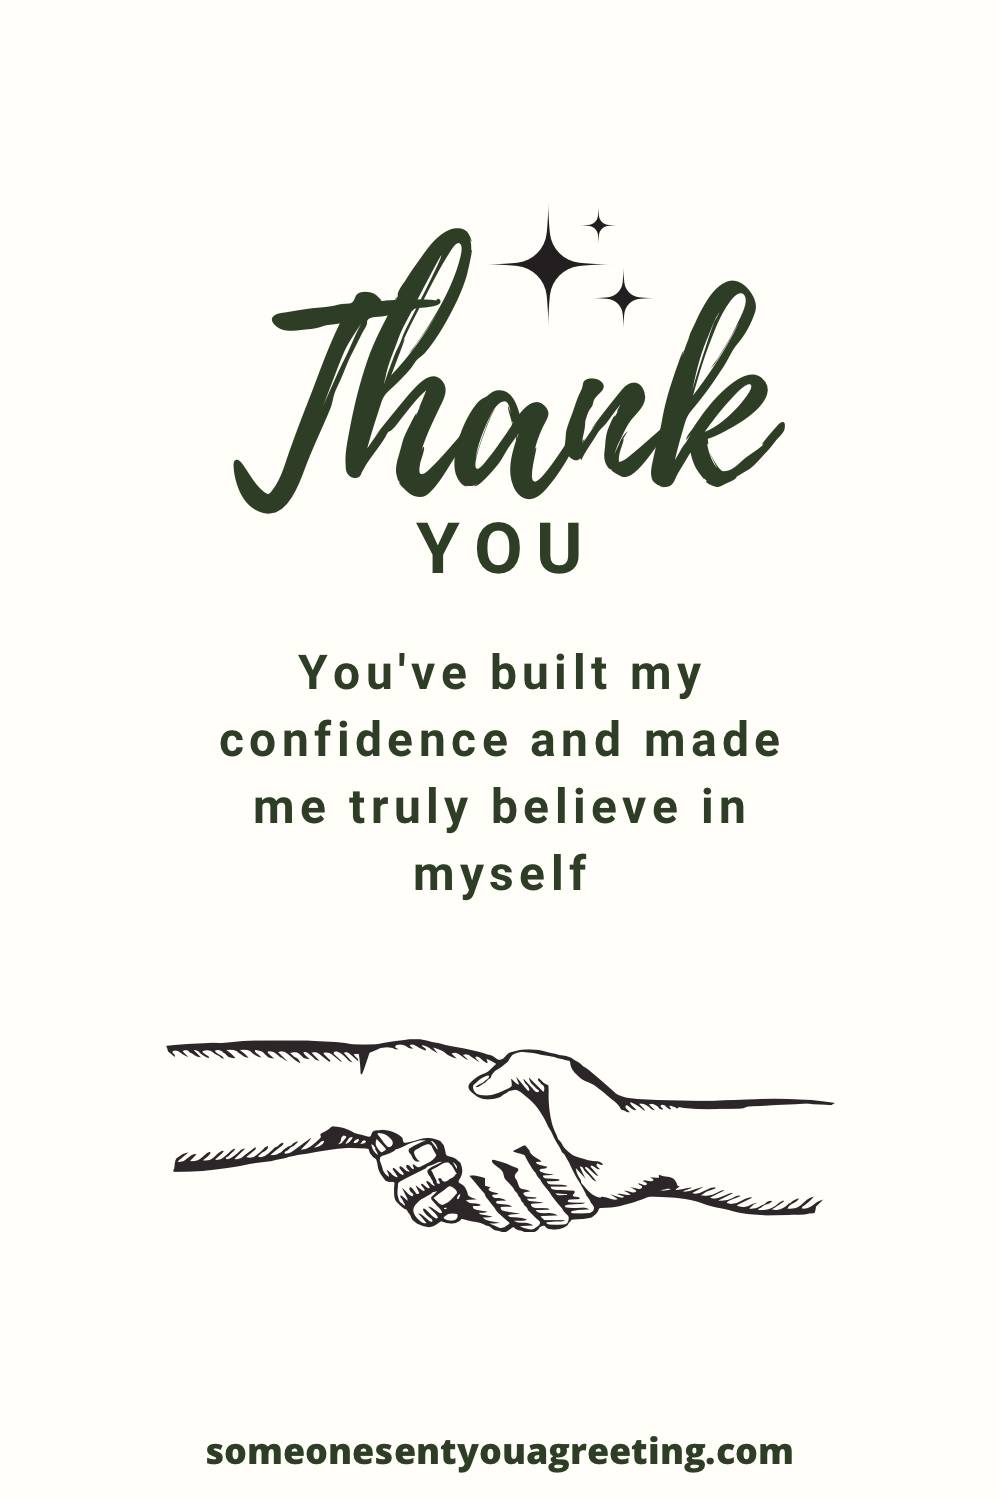 thank you for building my confidence and for your support